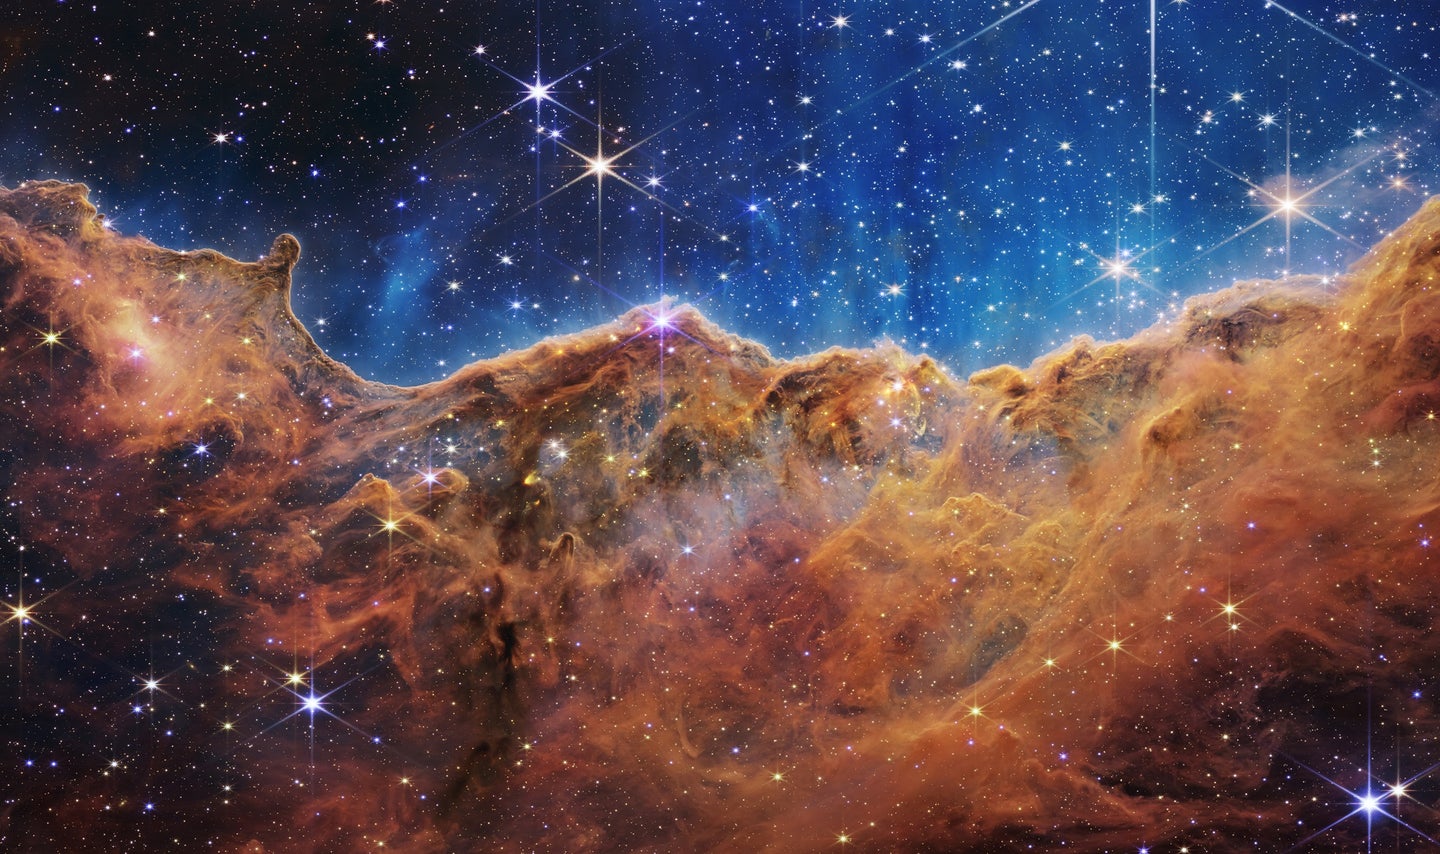 Starry valley of Carina Nebula against dust and light on a bluish universe in a James Webb Space Telescope image